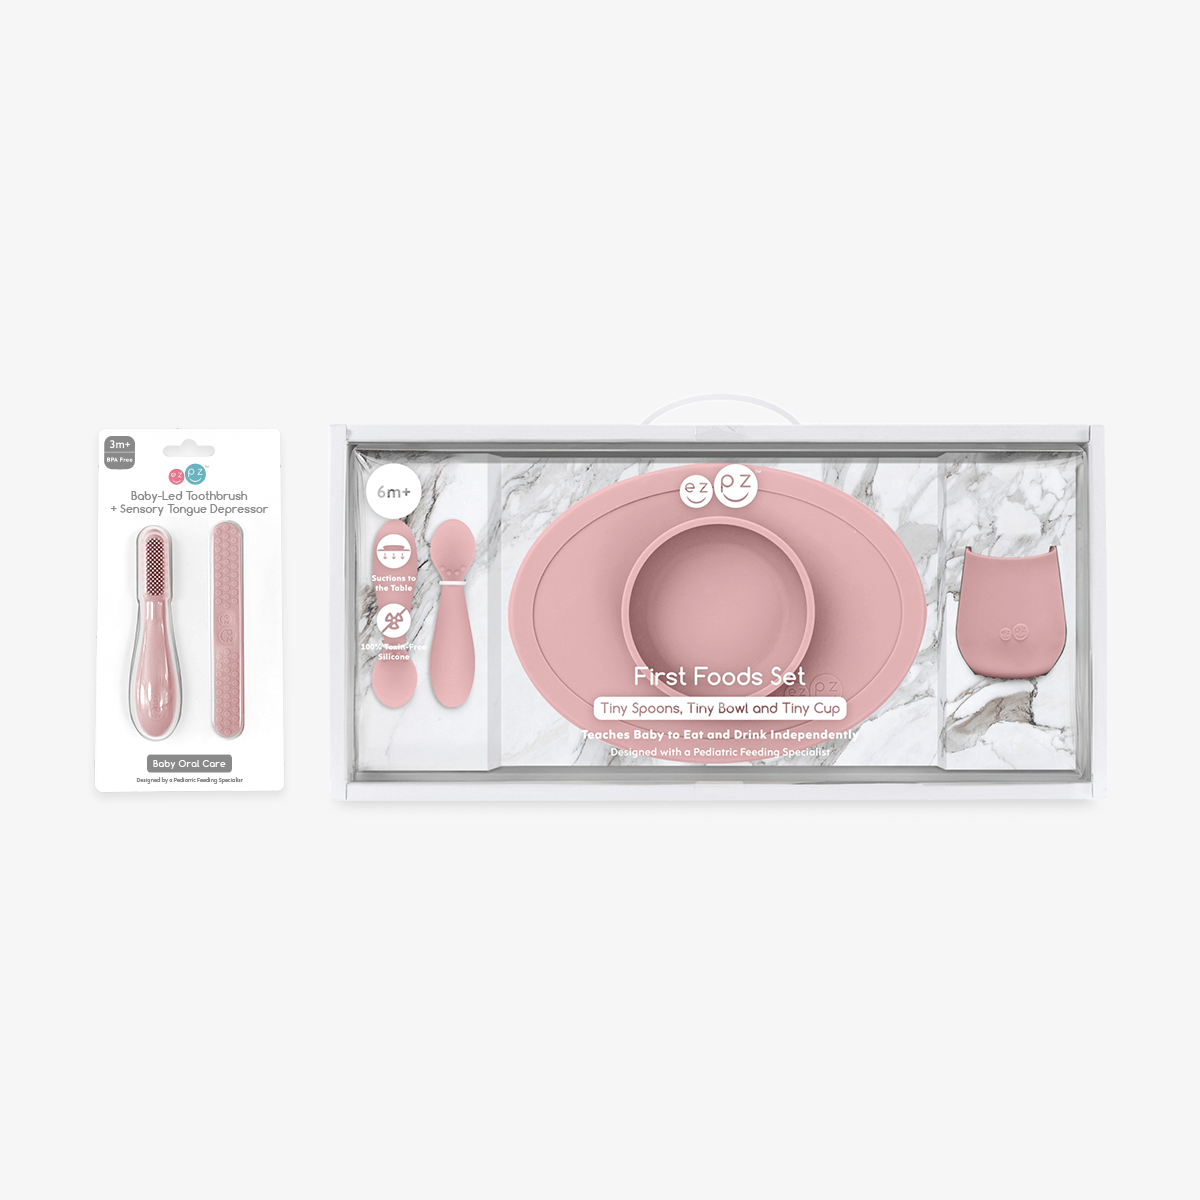 First Foods Oral Care Bundle in Blush Pink / ezpz Baby-Led™ Toothbrush + Sensory Tongue Depressor Dual Pack and First Foods Set